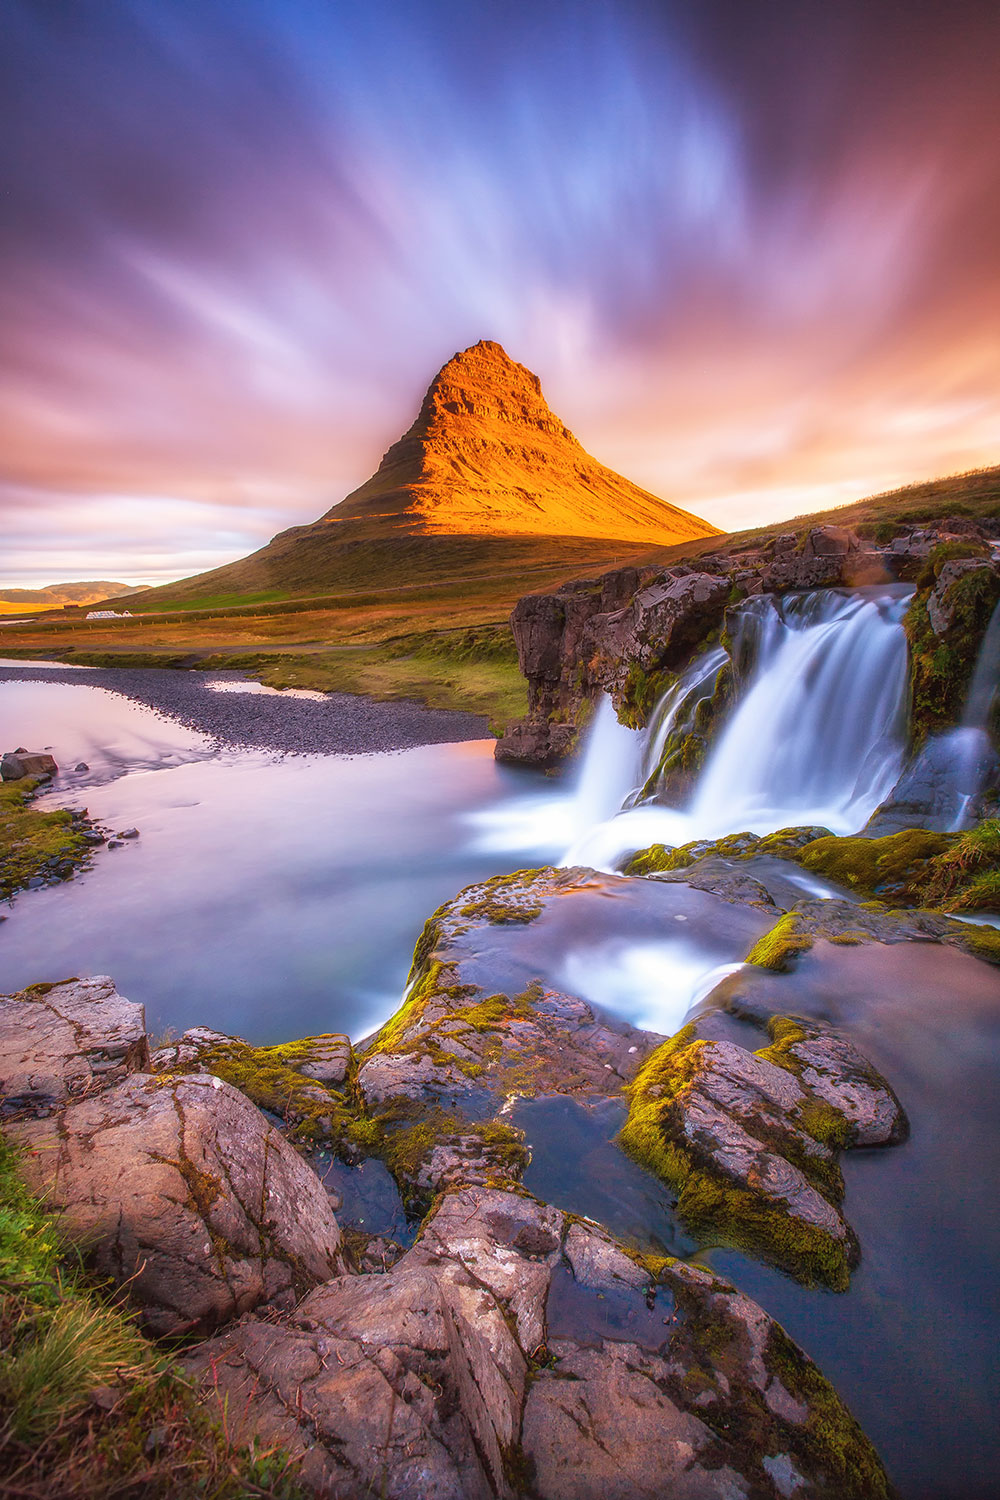 Waterfalll Photography: How To Photograph Waterfalls